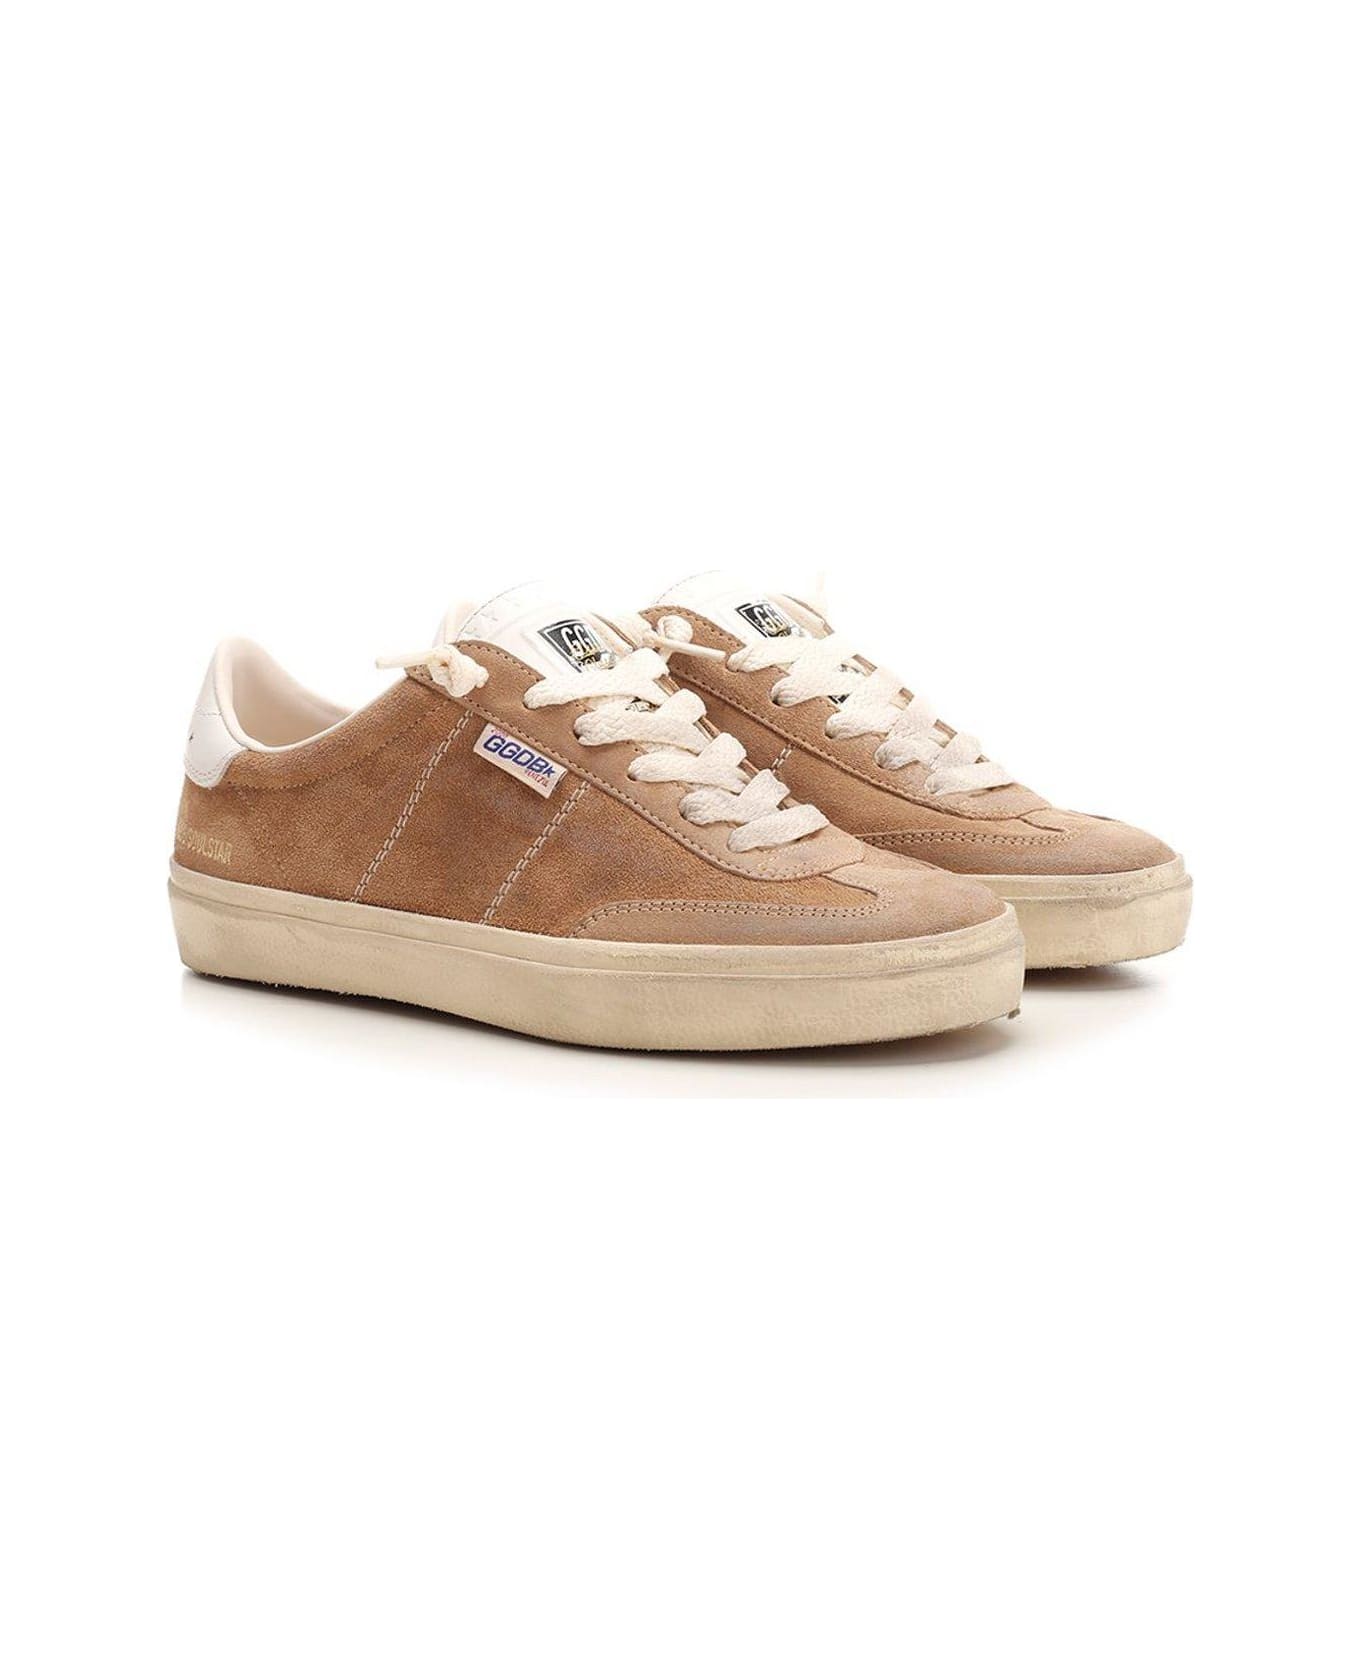 Golden Goose Soul Star Lace-up Sneakers - Brown スニーカー